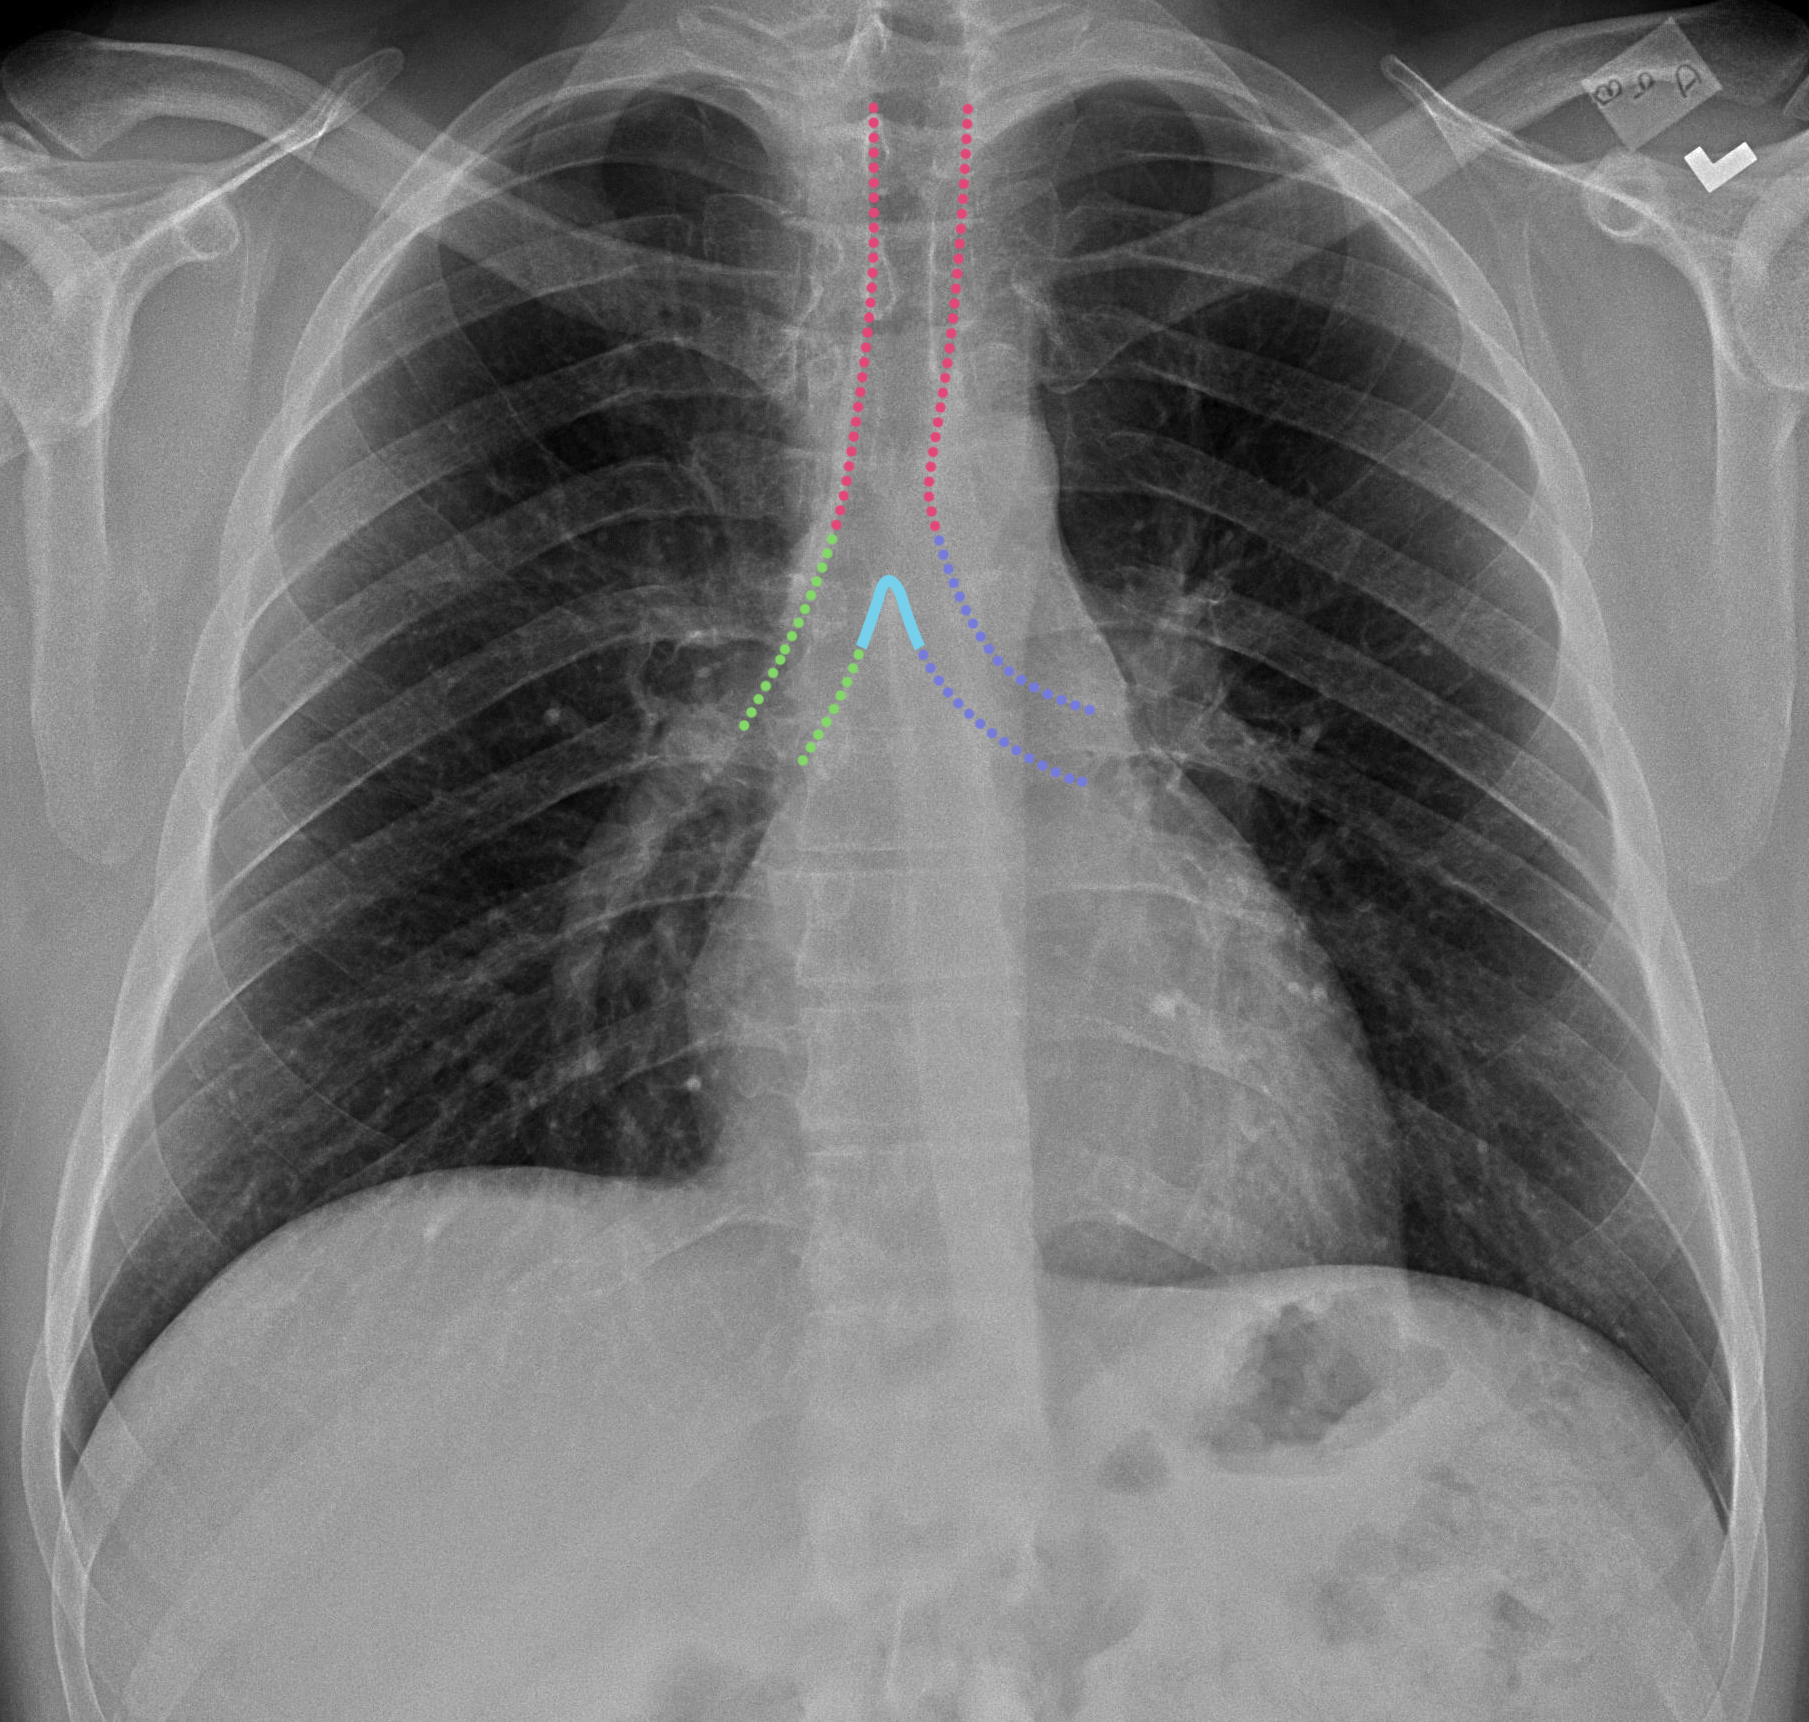 CaseStacks.com - Chest X-Ray Anatomy for Medical Students